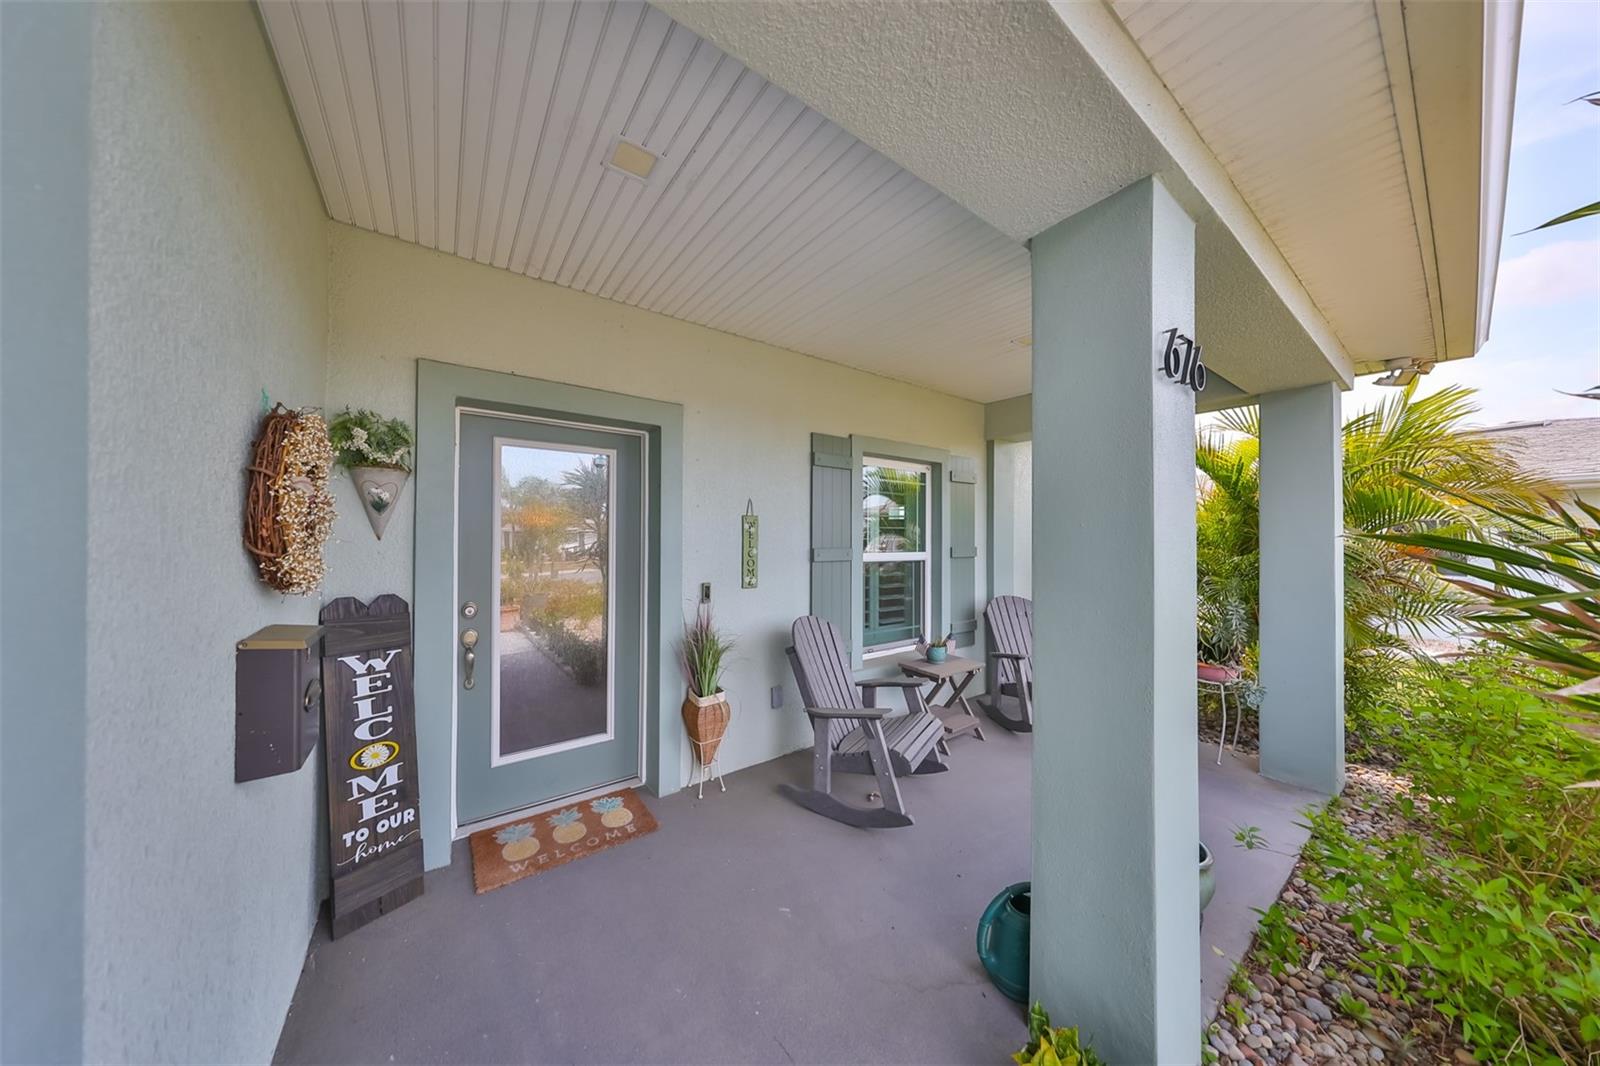 As you walk up to the front entrance, notice this gorgeous covered ranch style front porch! Perfect for rocking and sipping tea while sitting back and watching the world go by.